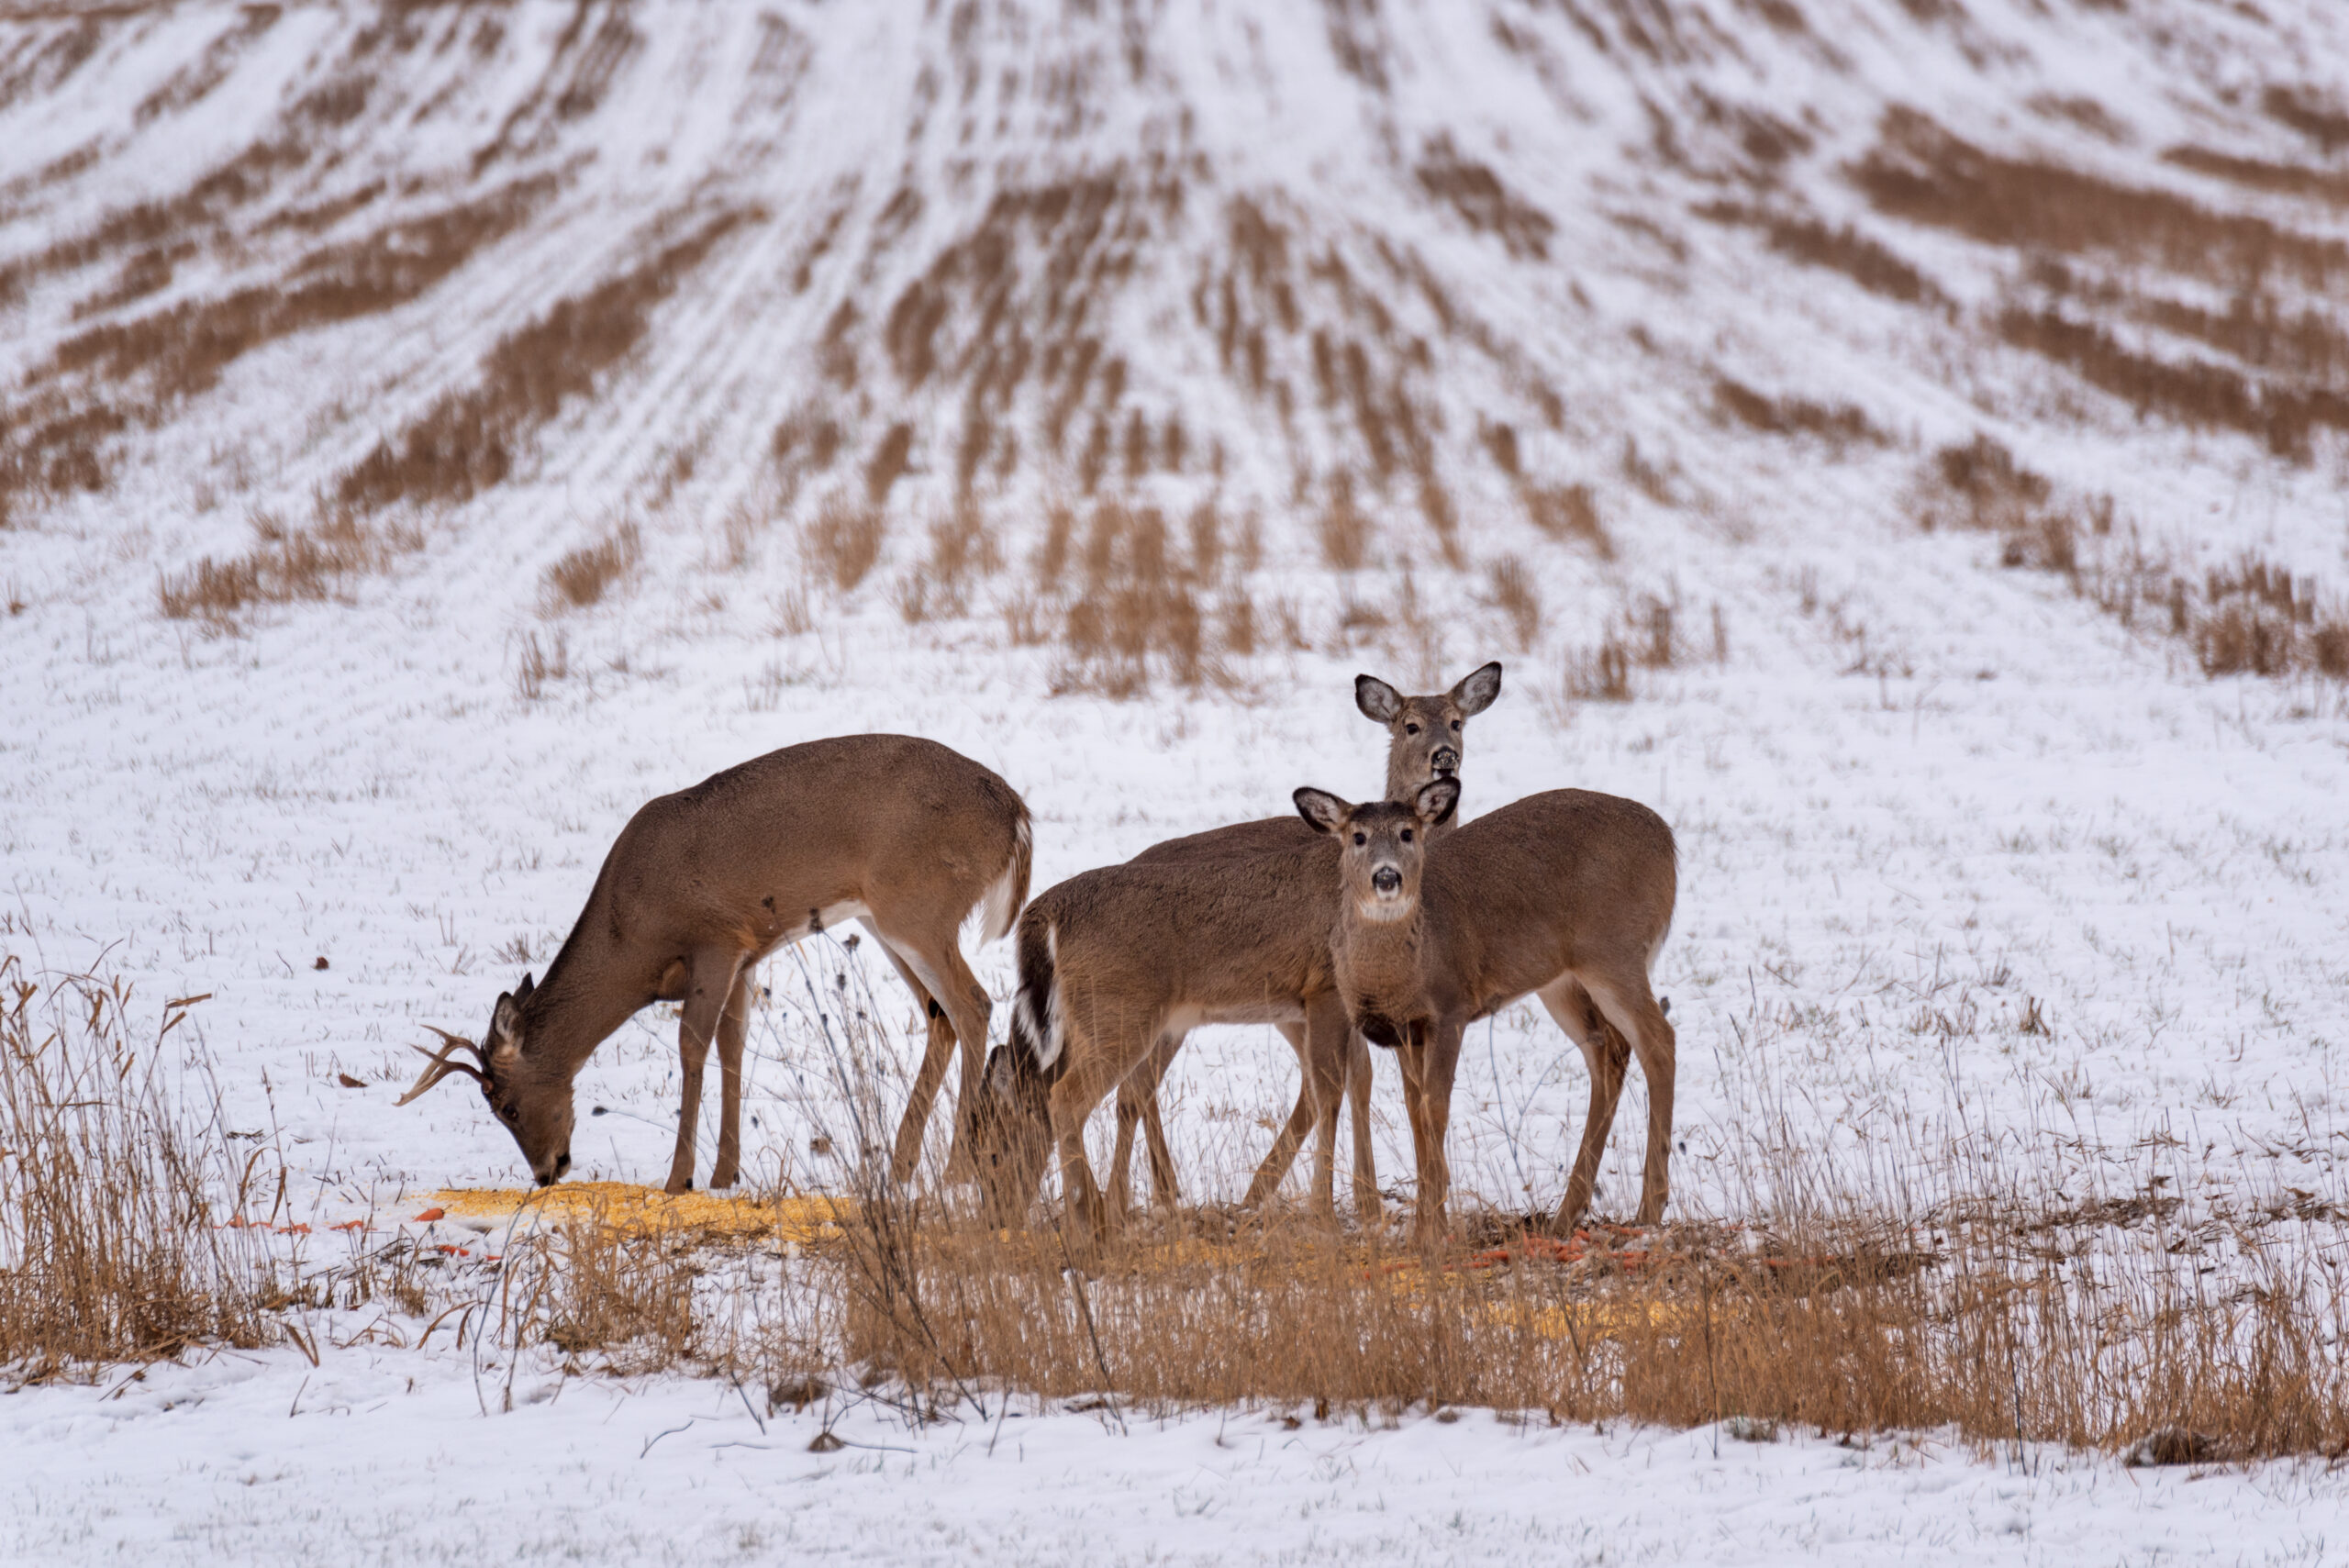 Whitetail deer eat from a pile of corn after a snowfall.